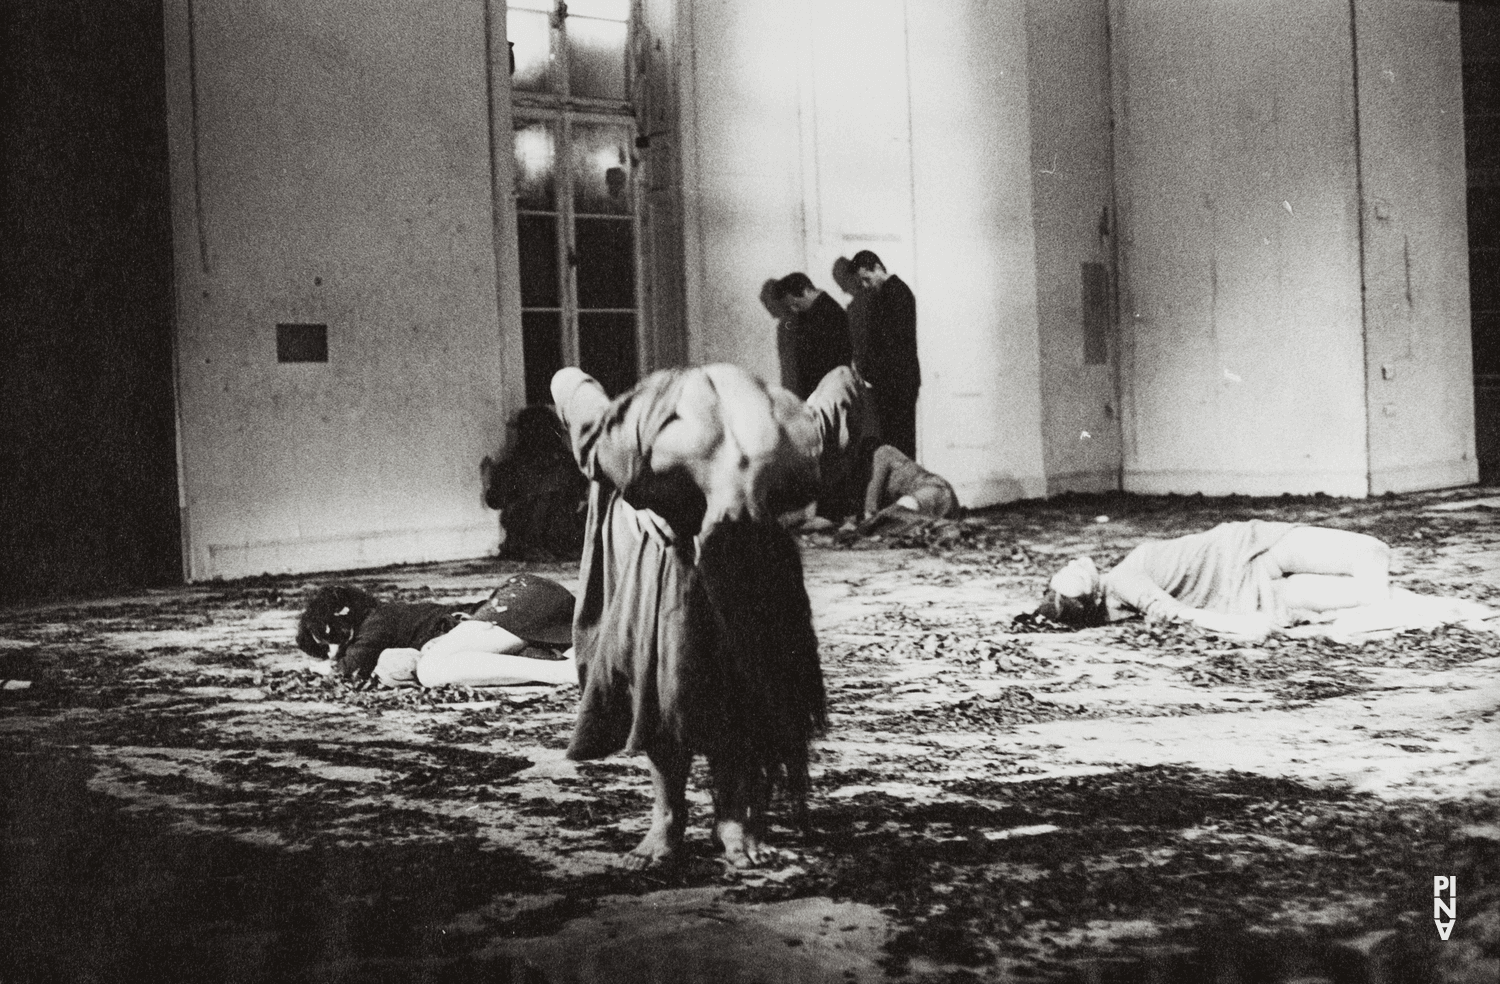 Heide Tegeder, Beatrice Libonati and Hans Dieter Knebel in “Bluebeard. While Listening to a Tape Recording of Béla Bartók's Opera "Duke Bluebeard's Castle"” by Pina Bausch